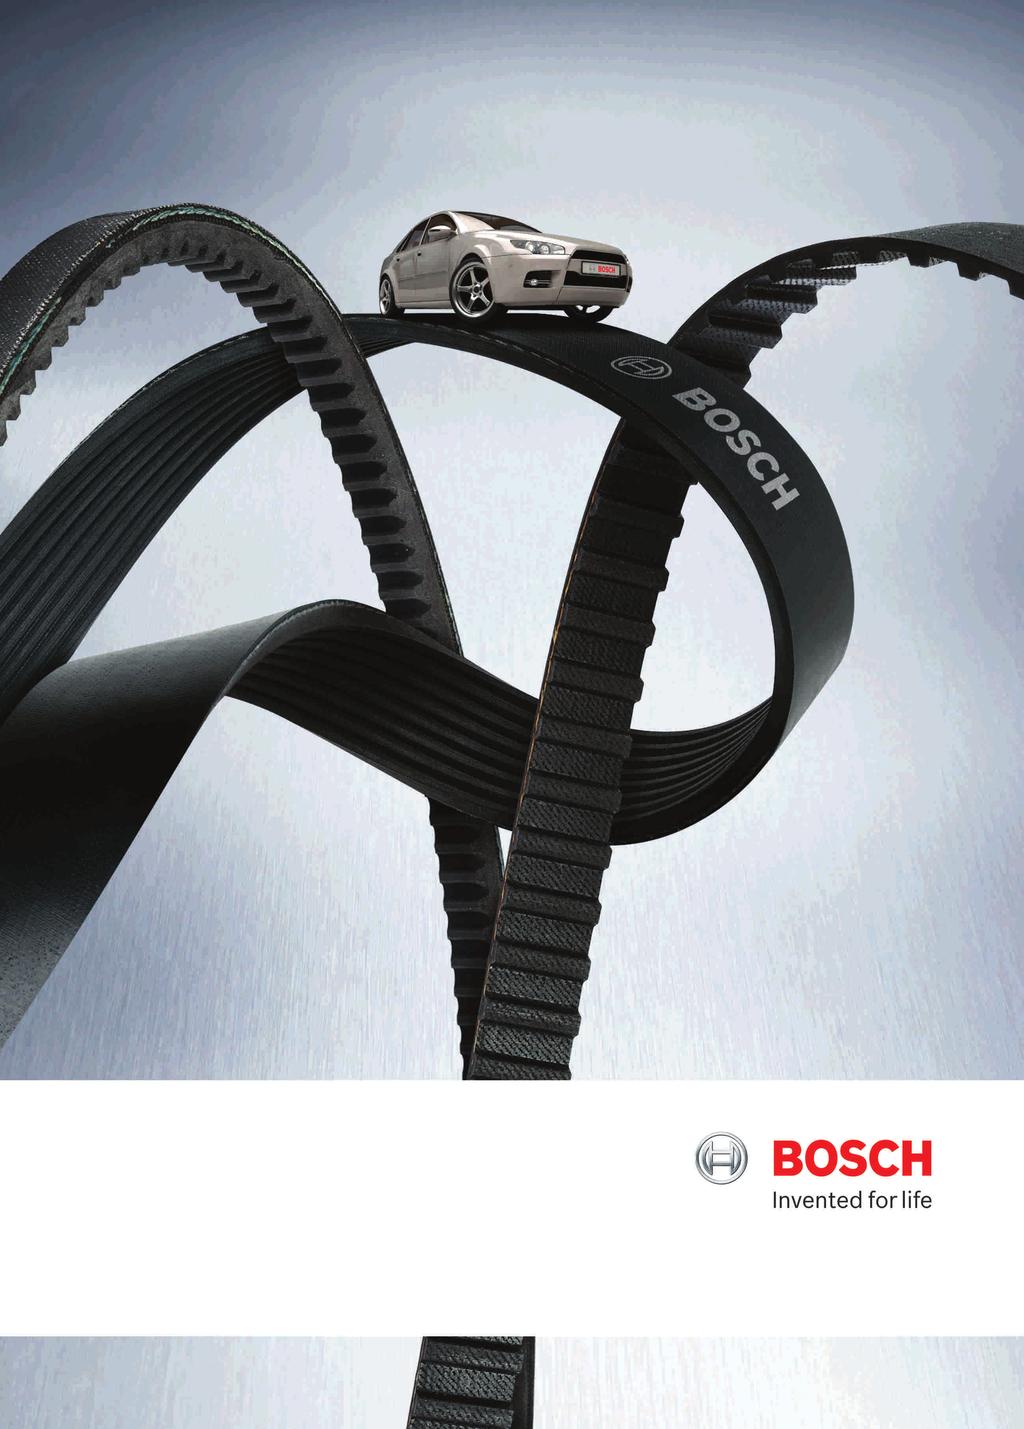 Quality is what drives us: belts and kits from Bosch